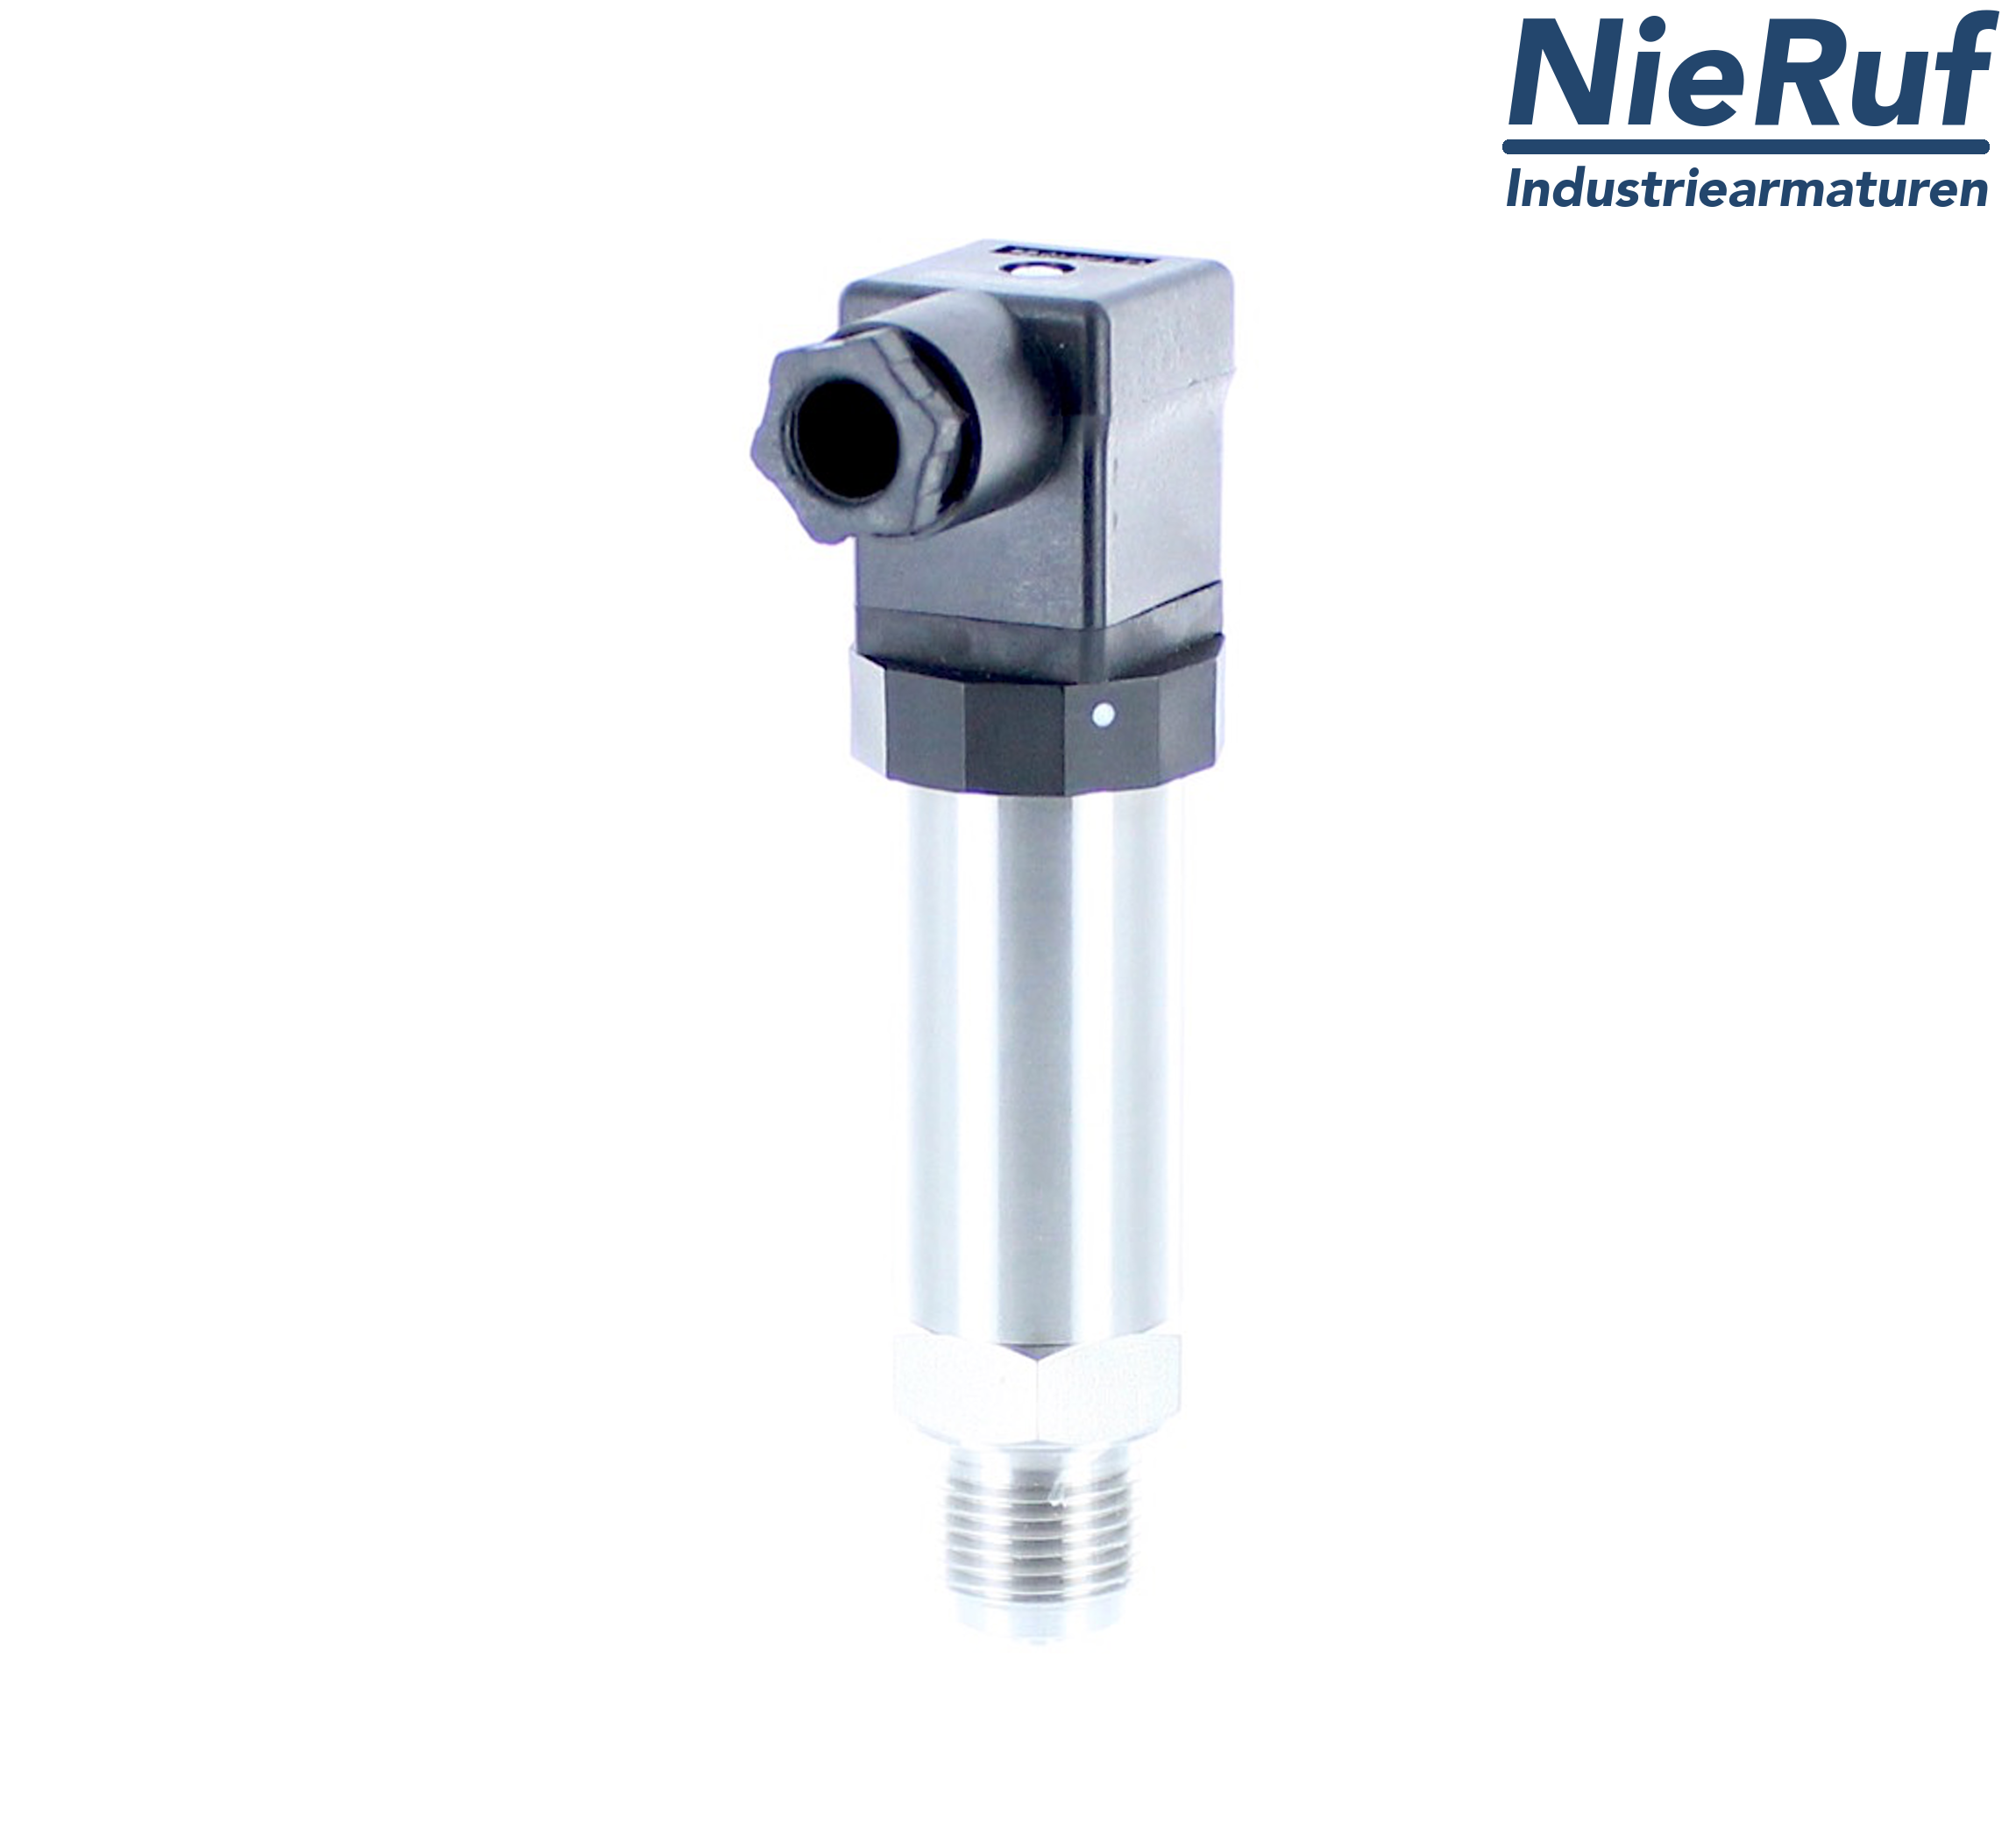 pressure sensor G 1/4" B DS01 stainless steel 2-wire: 4-20mA FPM 0,0 - 100,0 bar